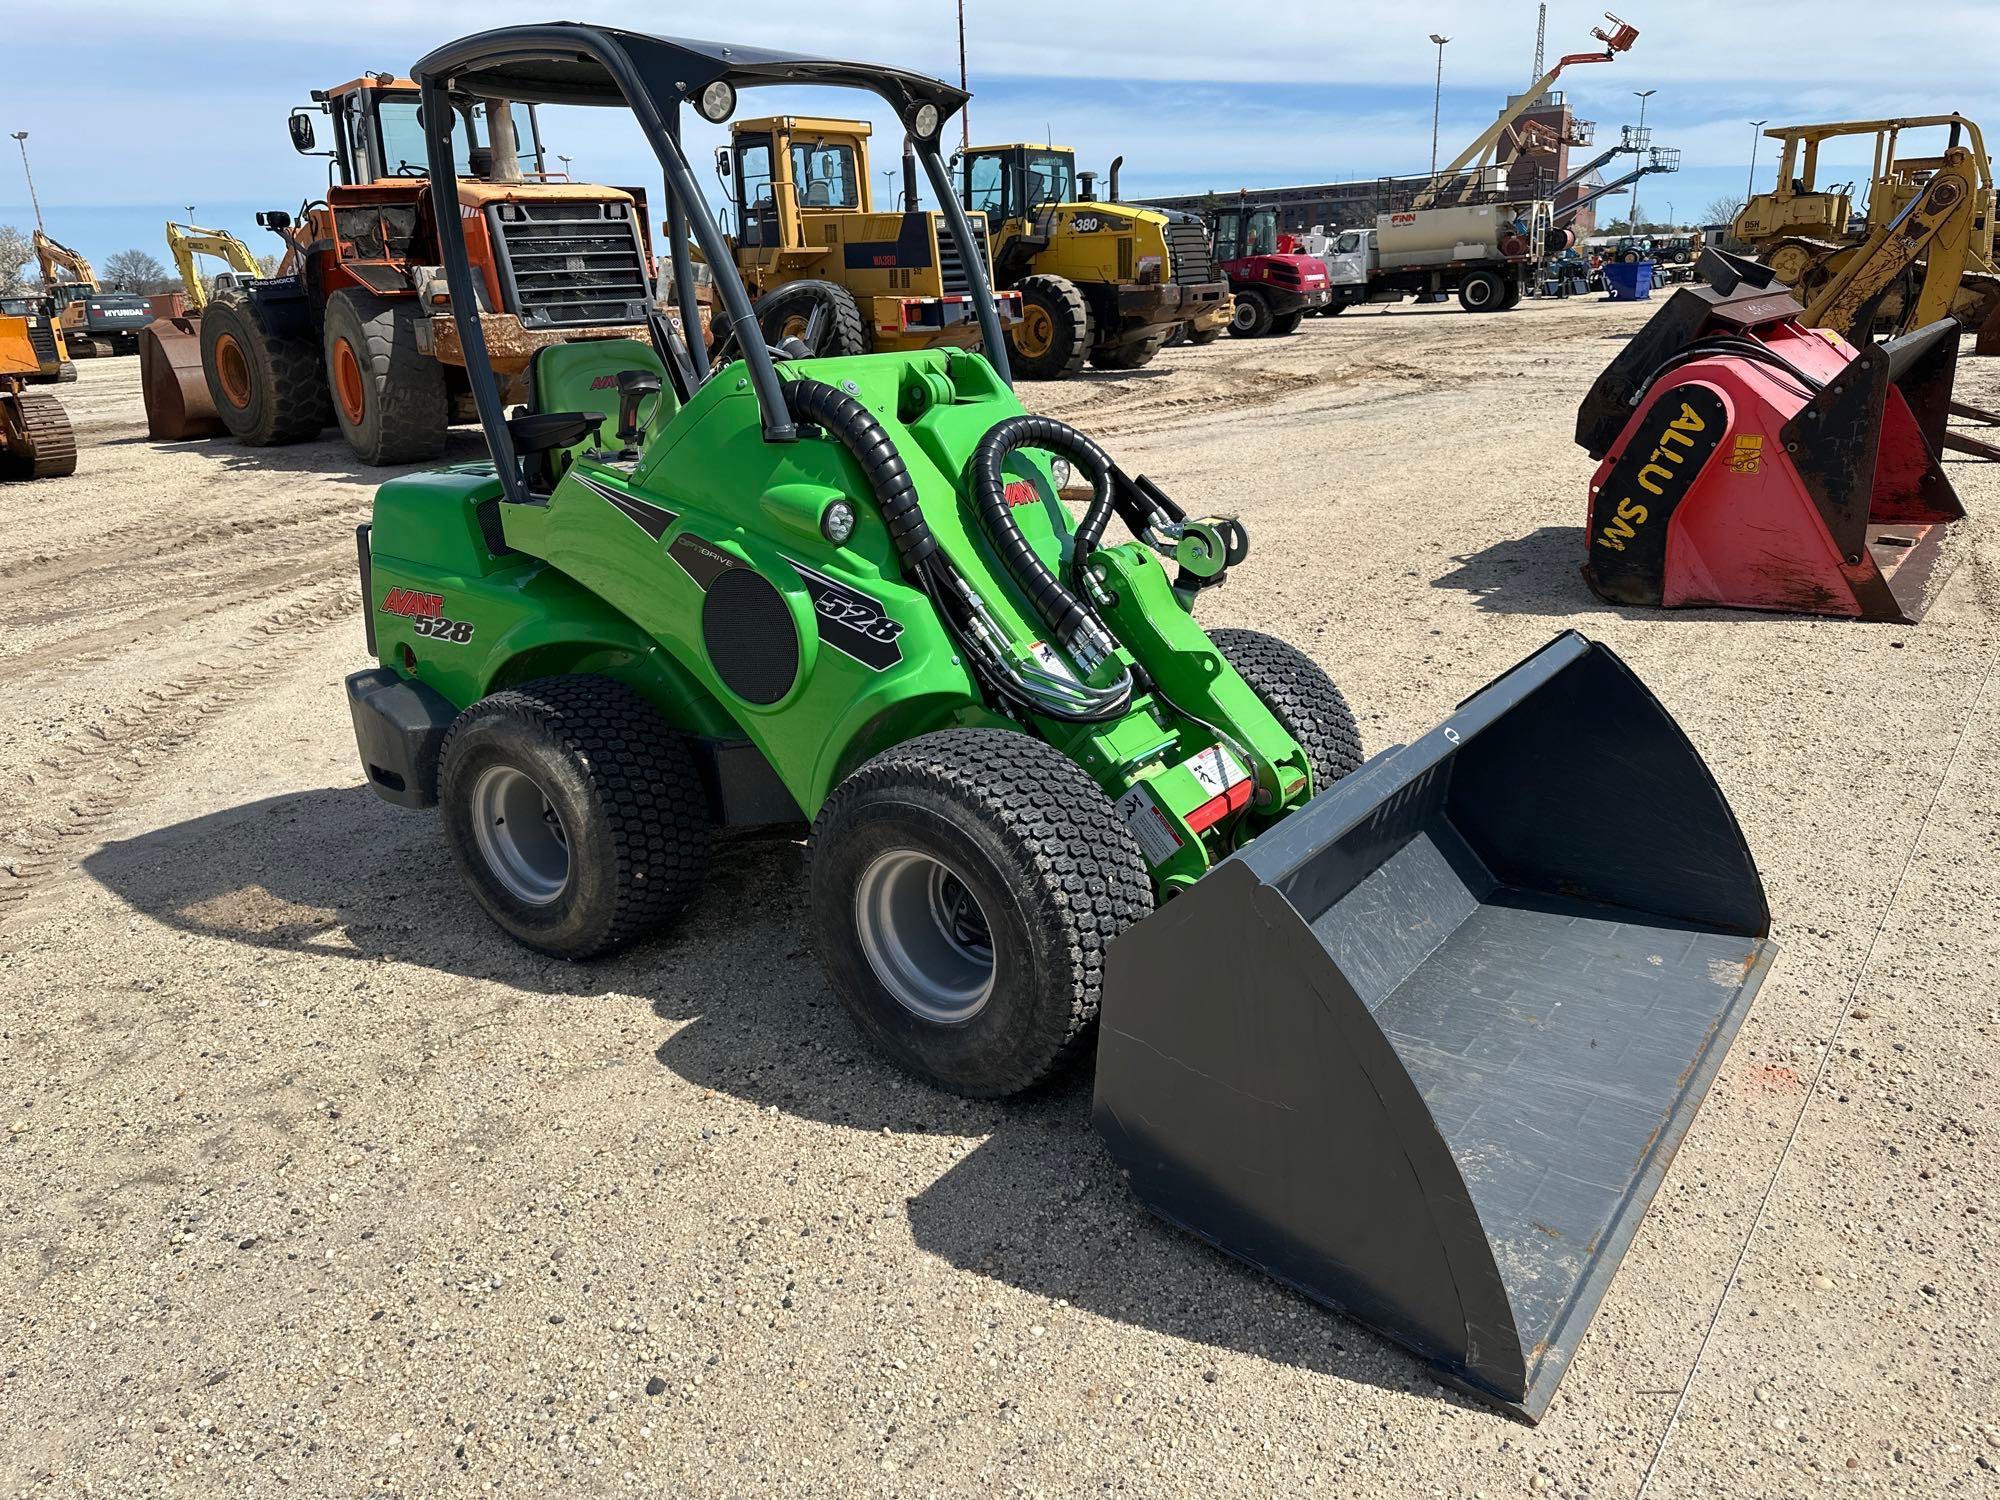 NEW AVANT M528 RUBBER TIRED LOADER... SN-108469 powered by diesel engine, equipped with OROPS,